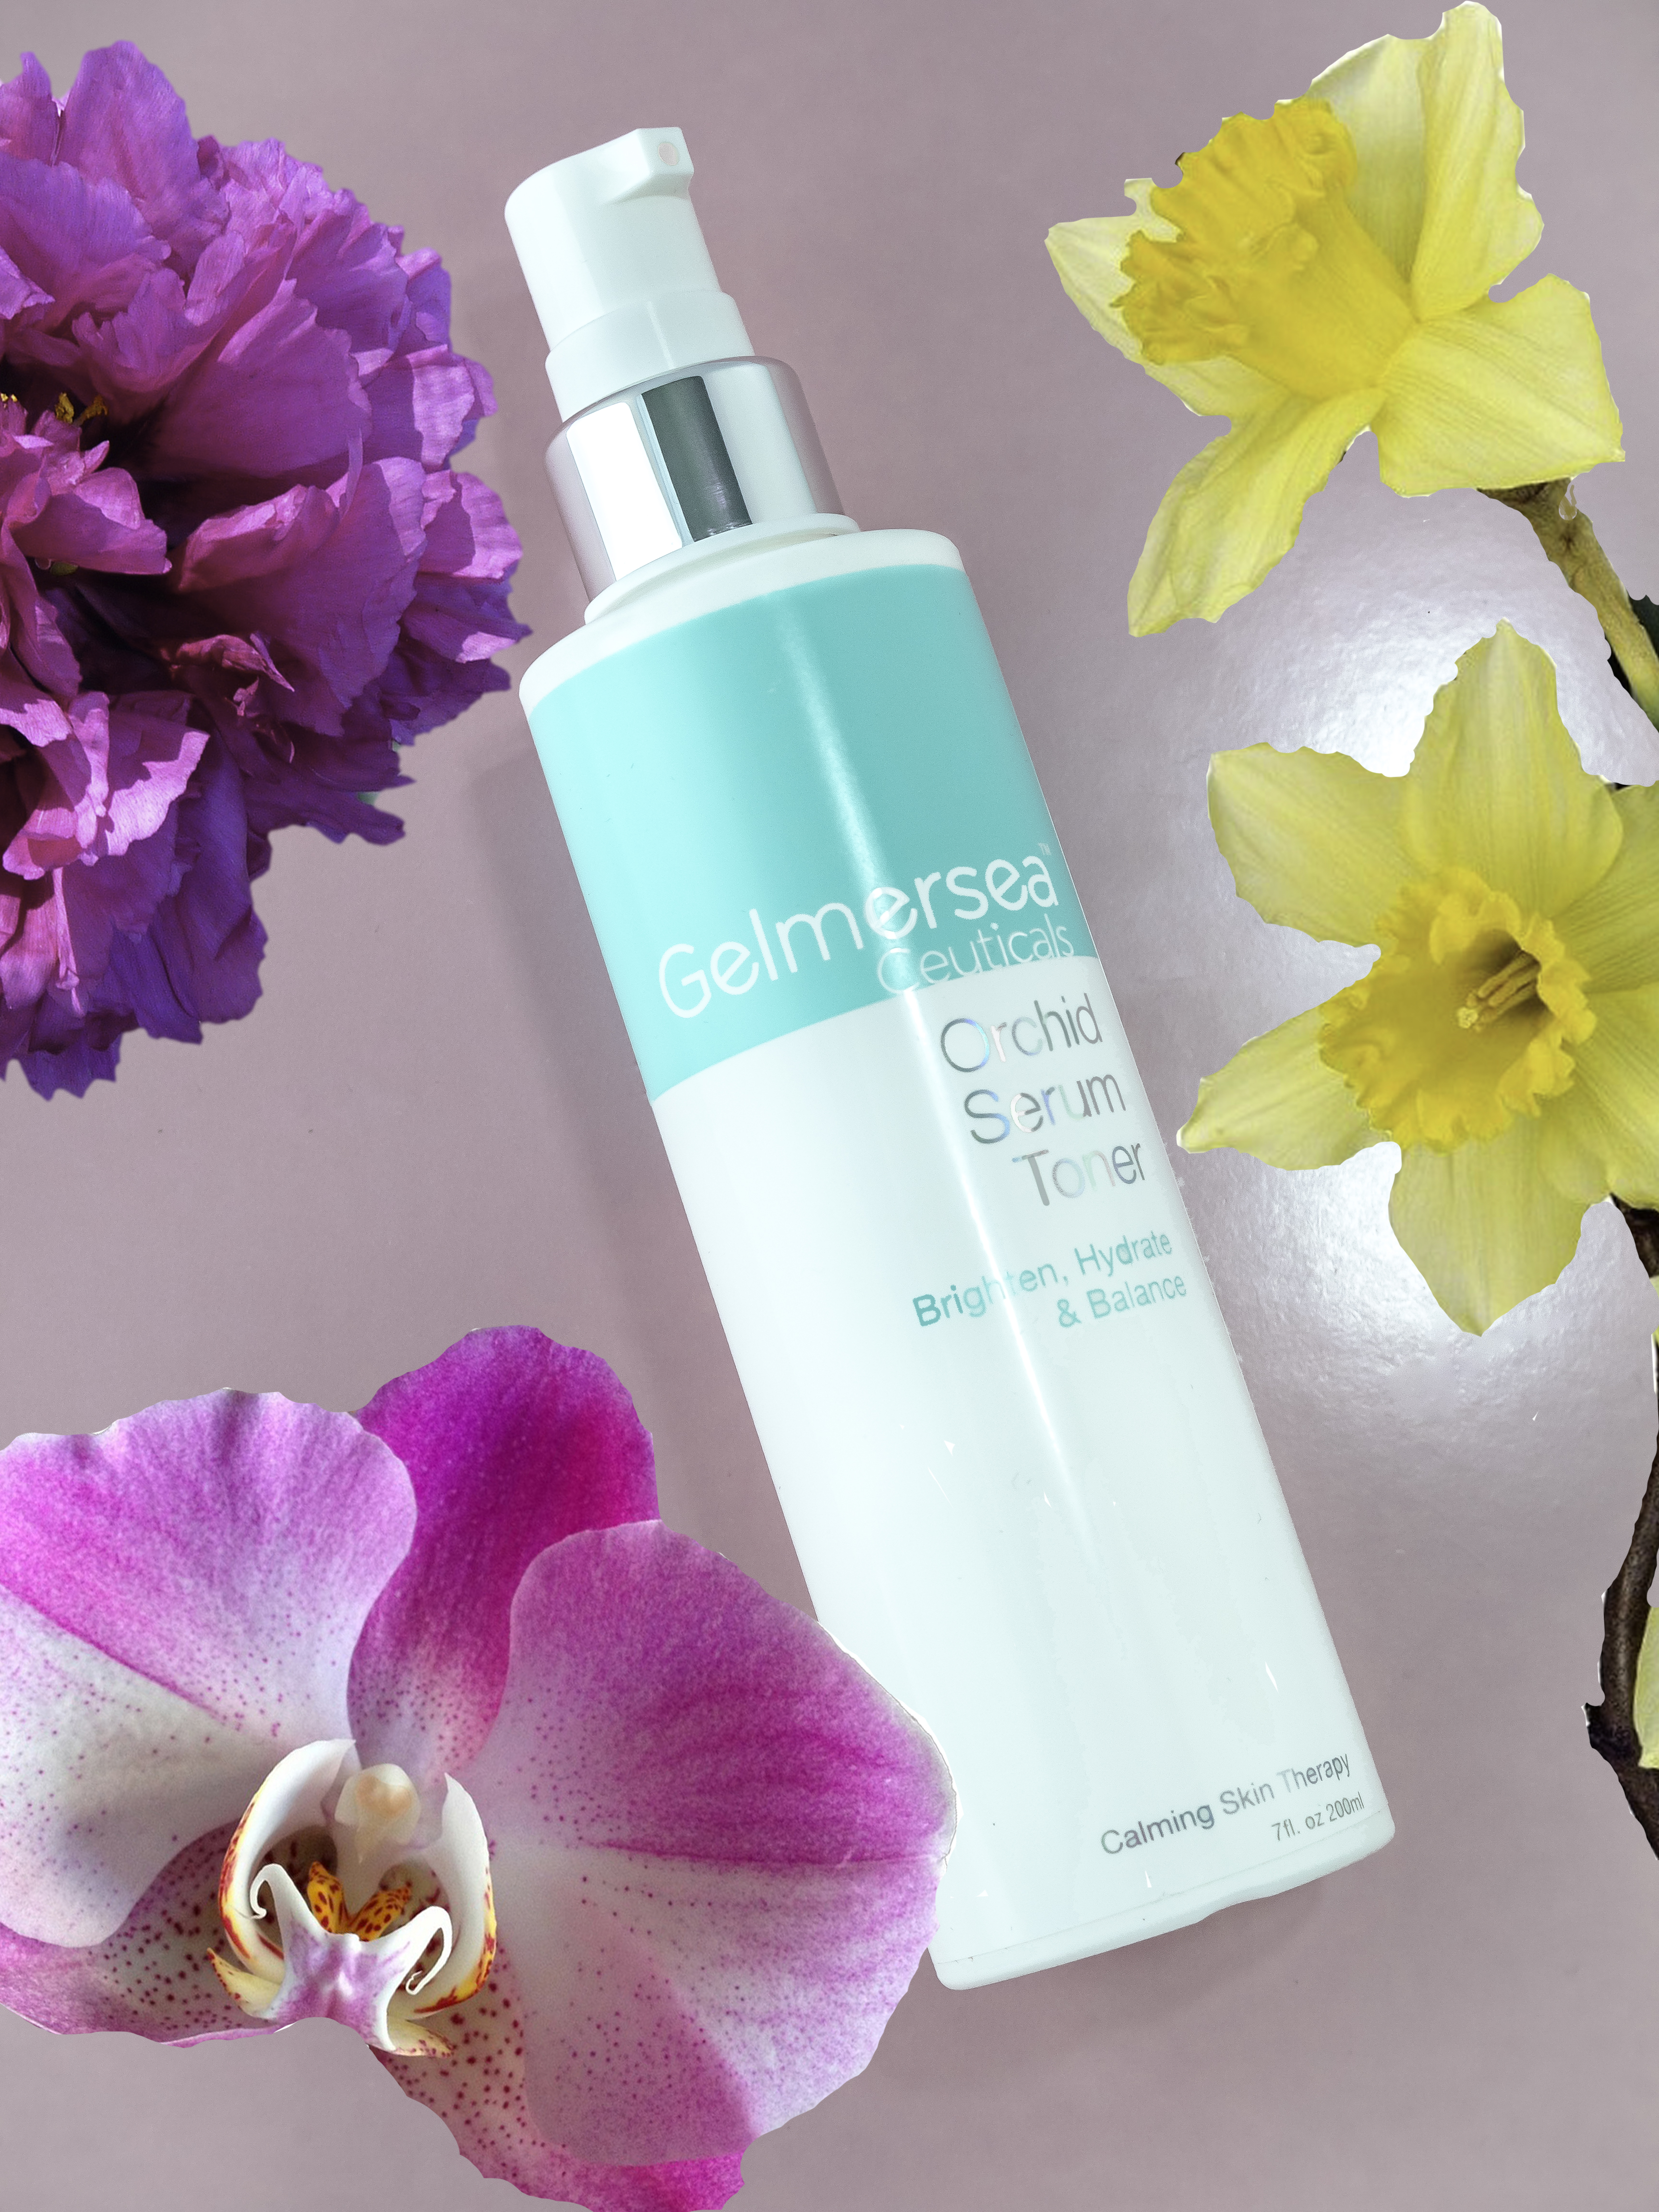 Orchid Serum Toner contains peony extract, orchid, and daffodil extracts